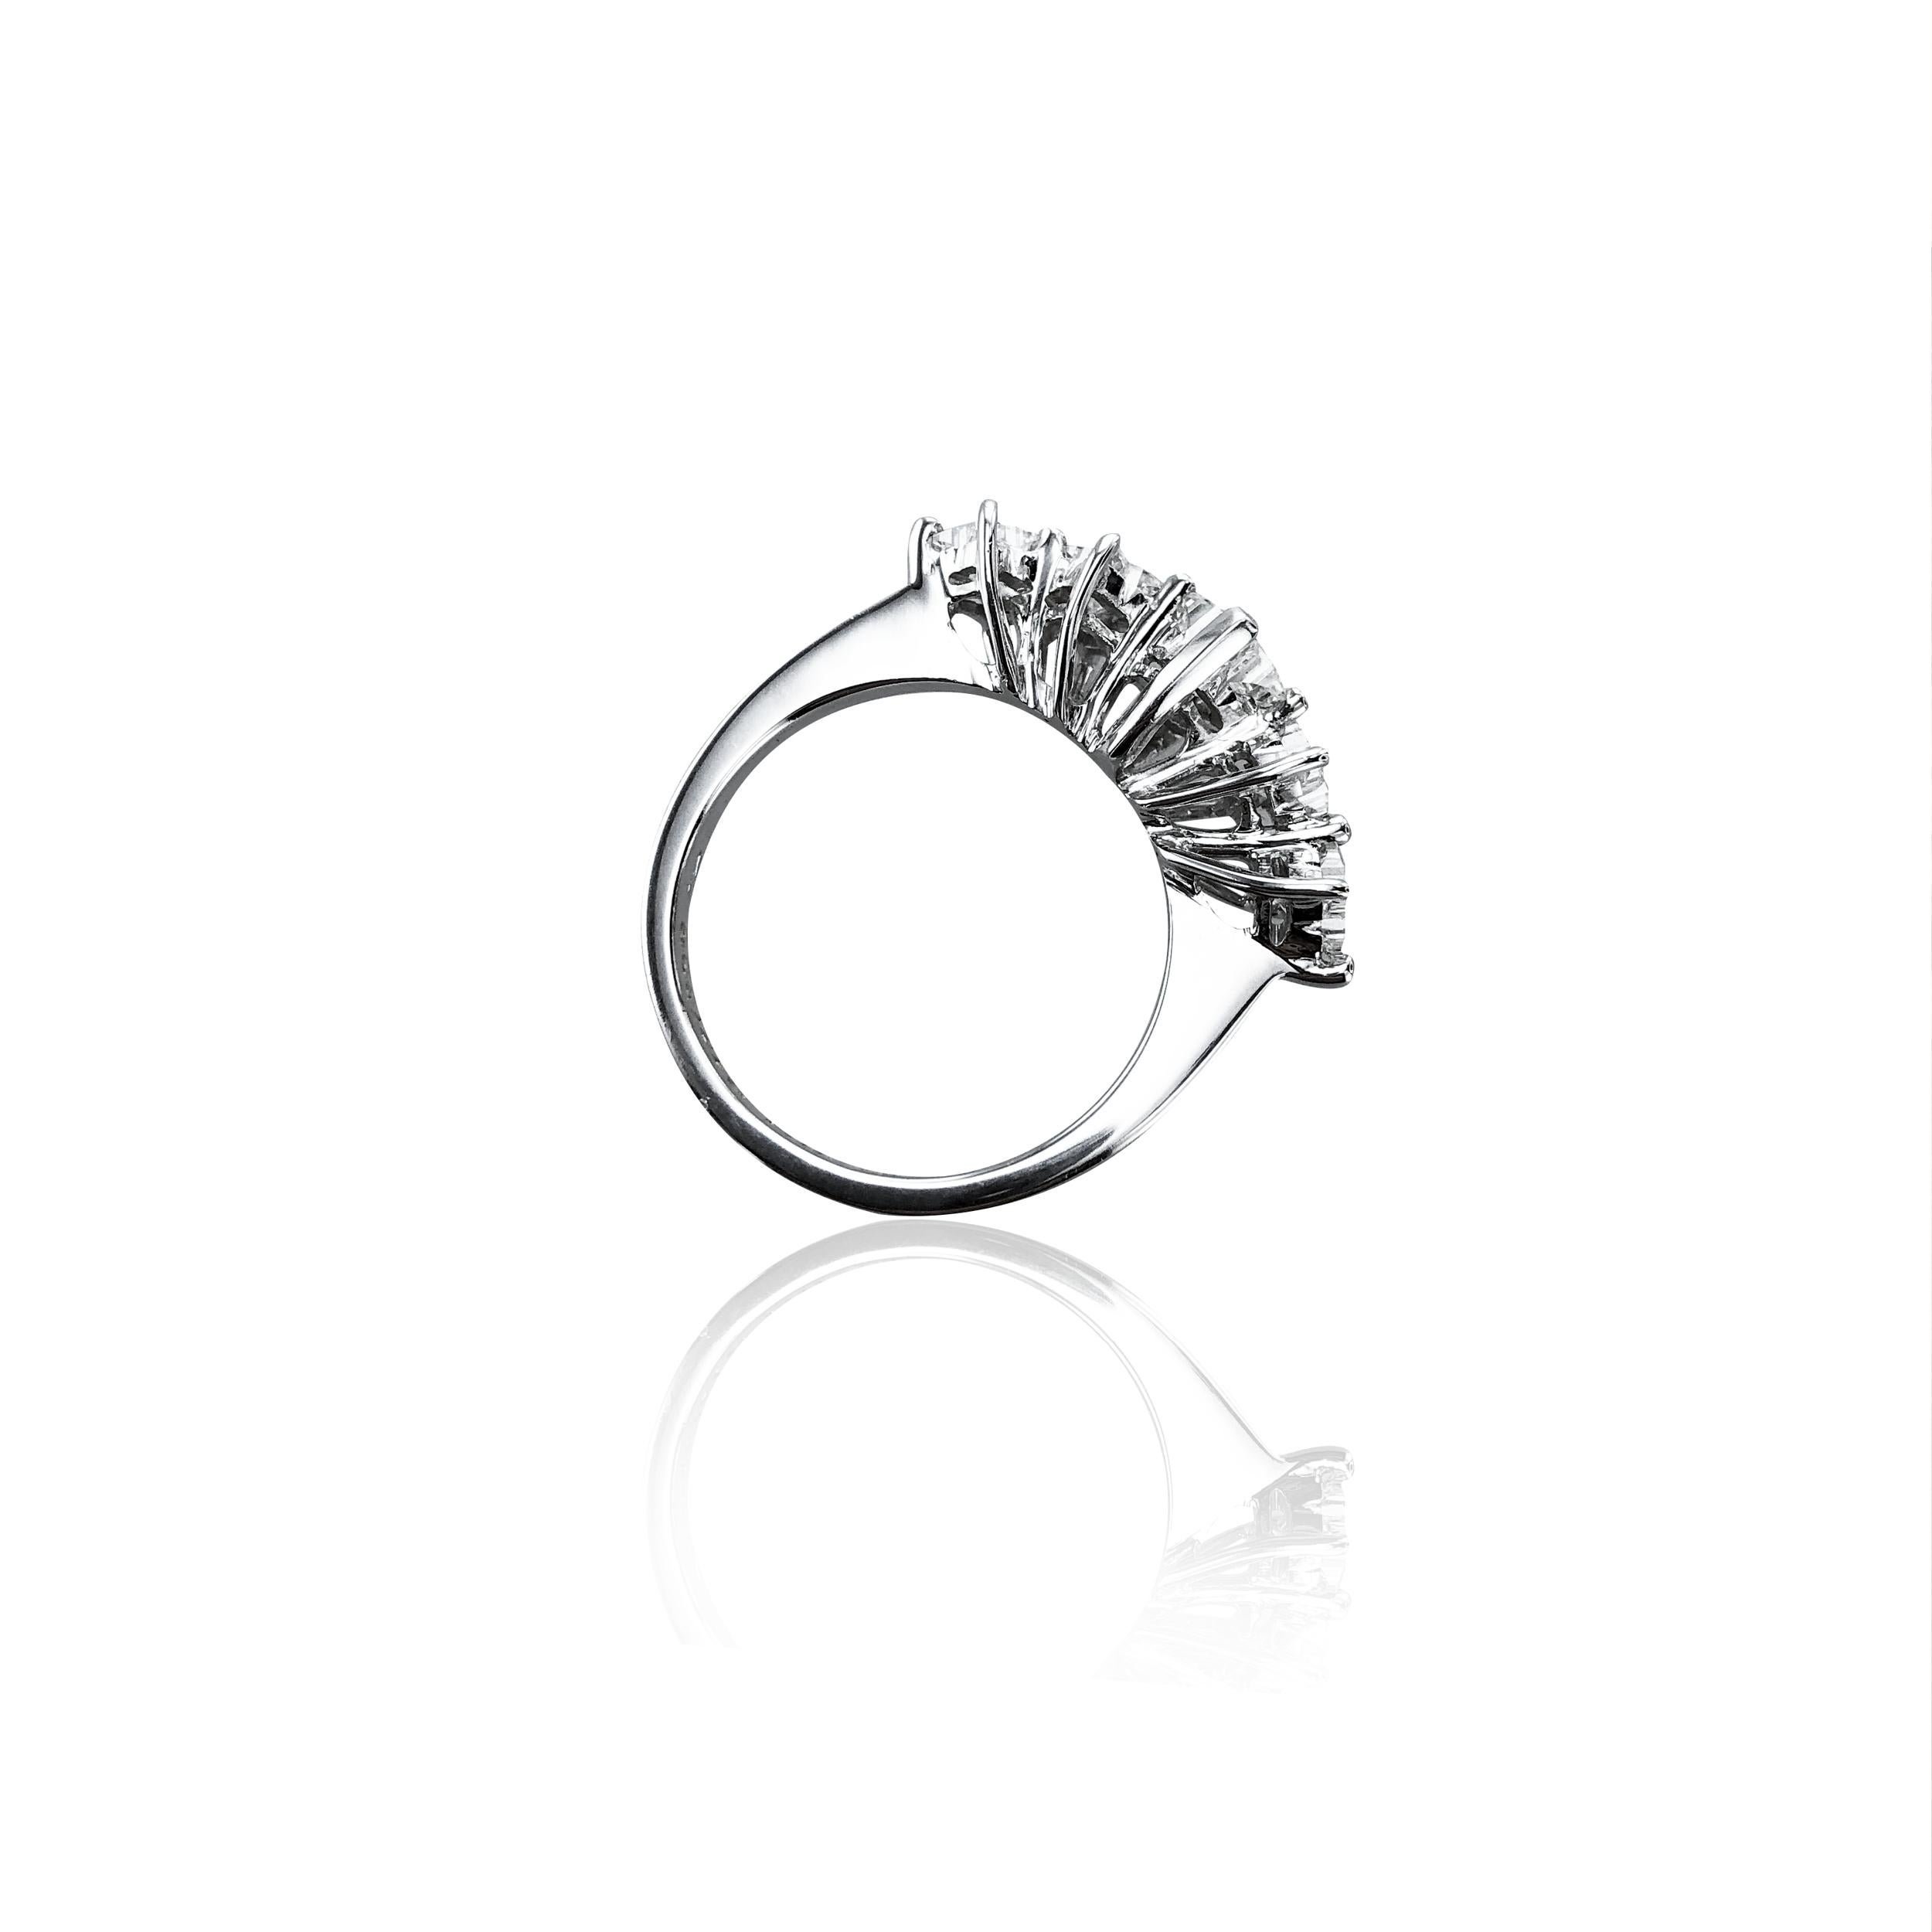 This 5 Stone 1.25 Carat of Diamonds is set in an 18Kt White Gold cocktail ring.
Striking and wearable for special occasions and every day, it graces the finger with elegance and style. 

Produced, designed and certified in Italy by Amin Luxury.